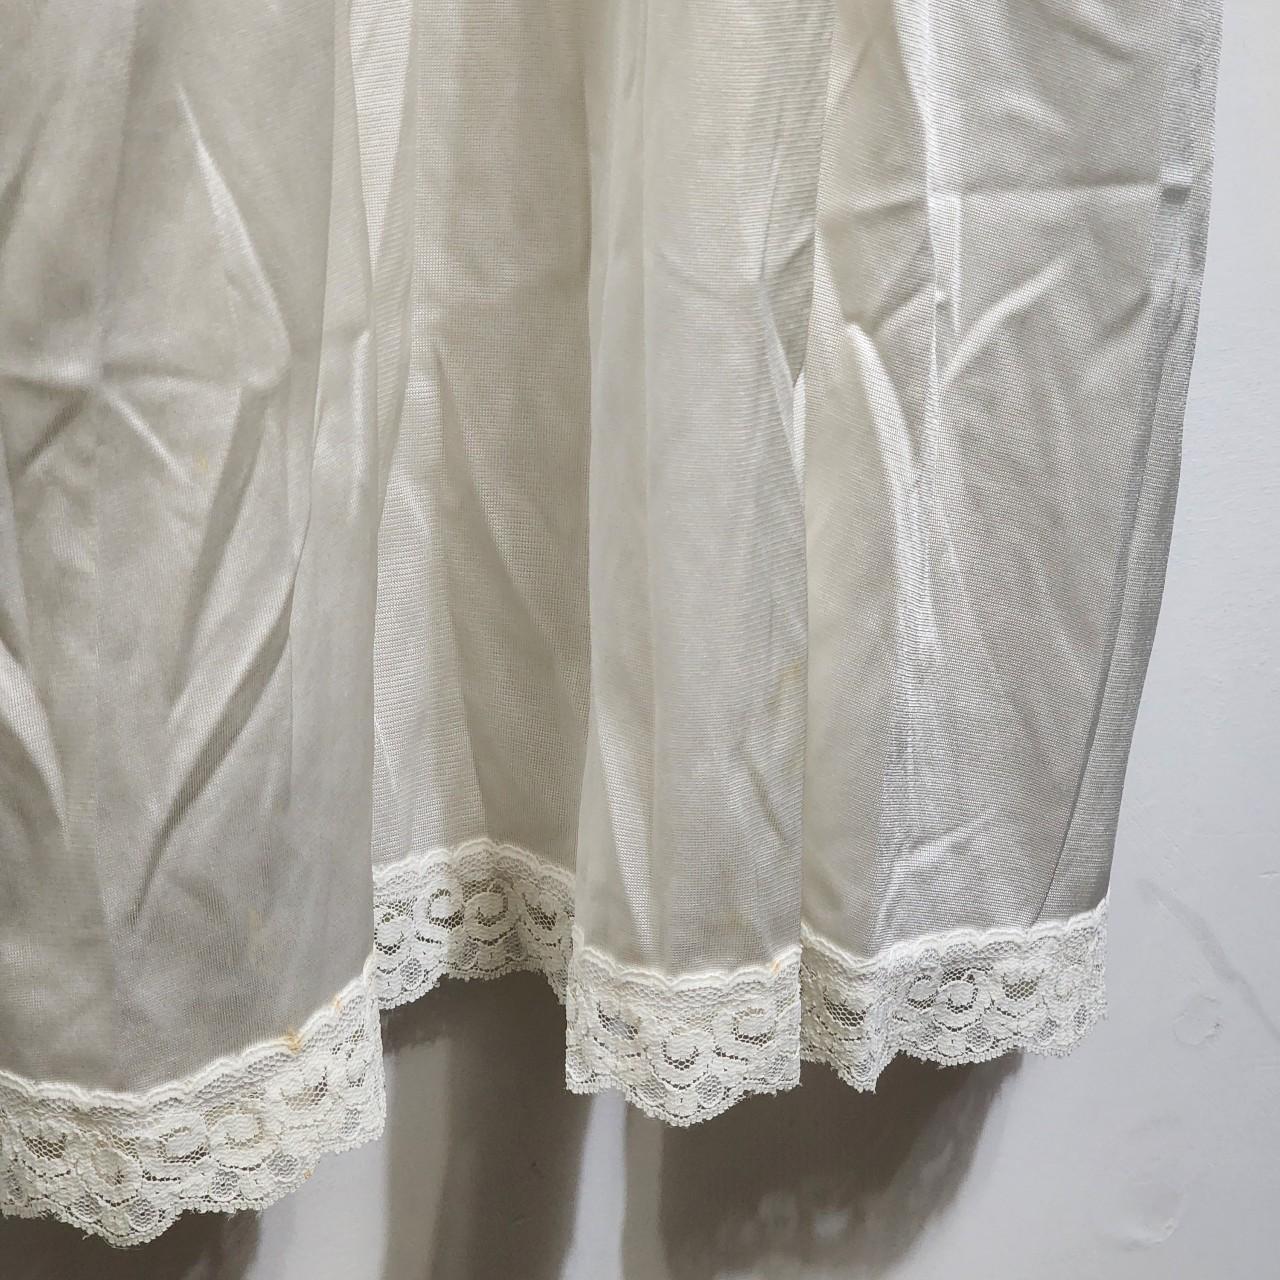 VINTAGE WHITE SILK NIGHT GOWN SLIP WITH LACE... - Depop